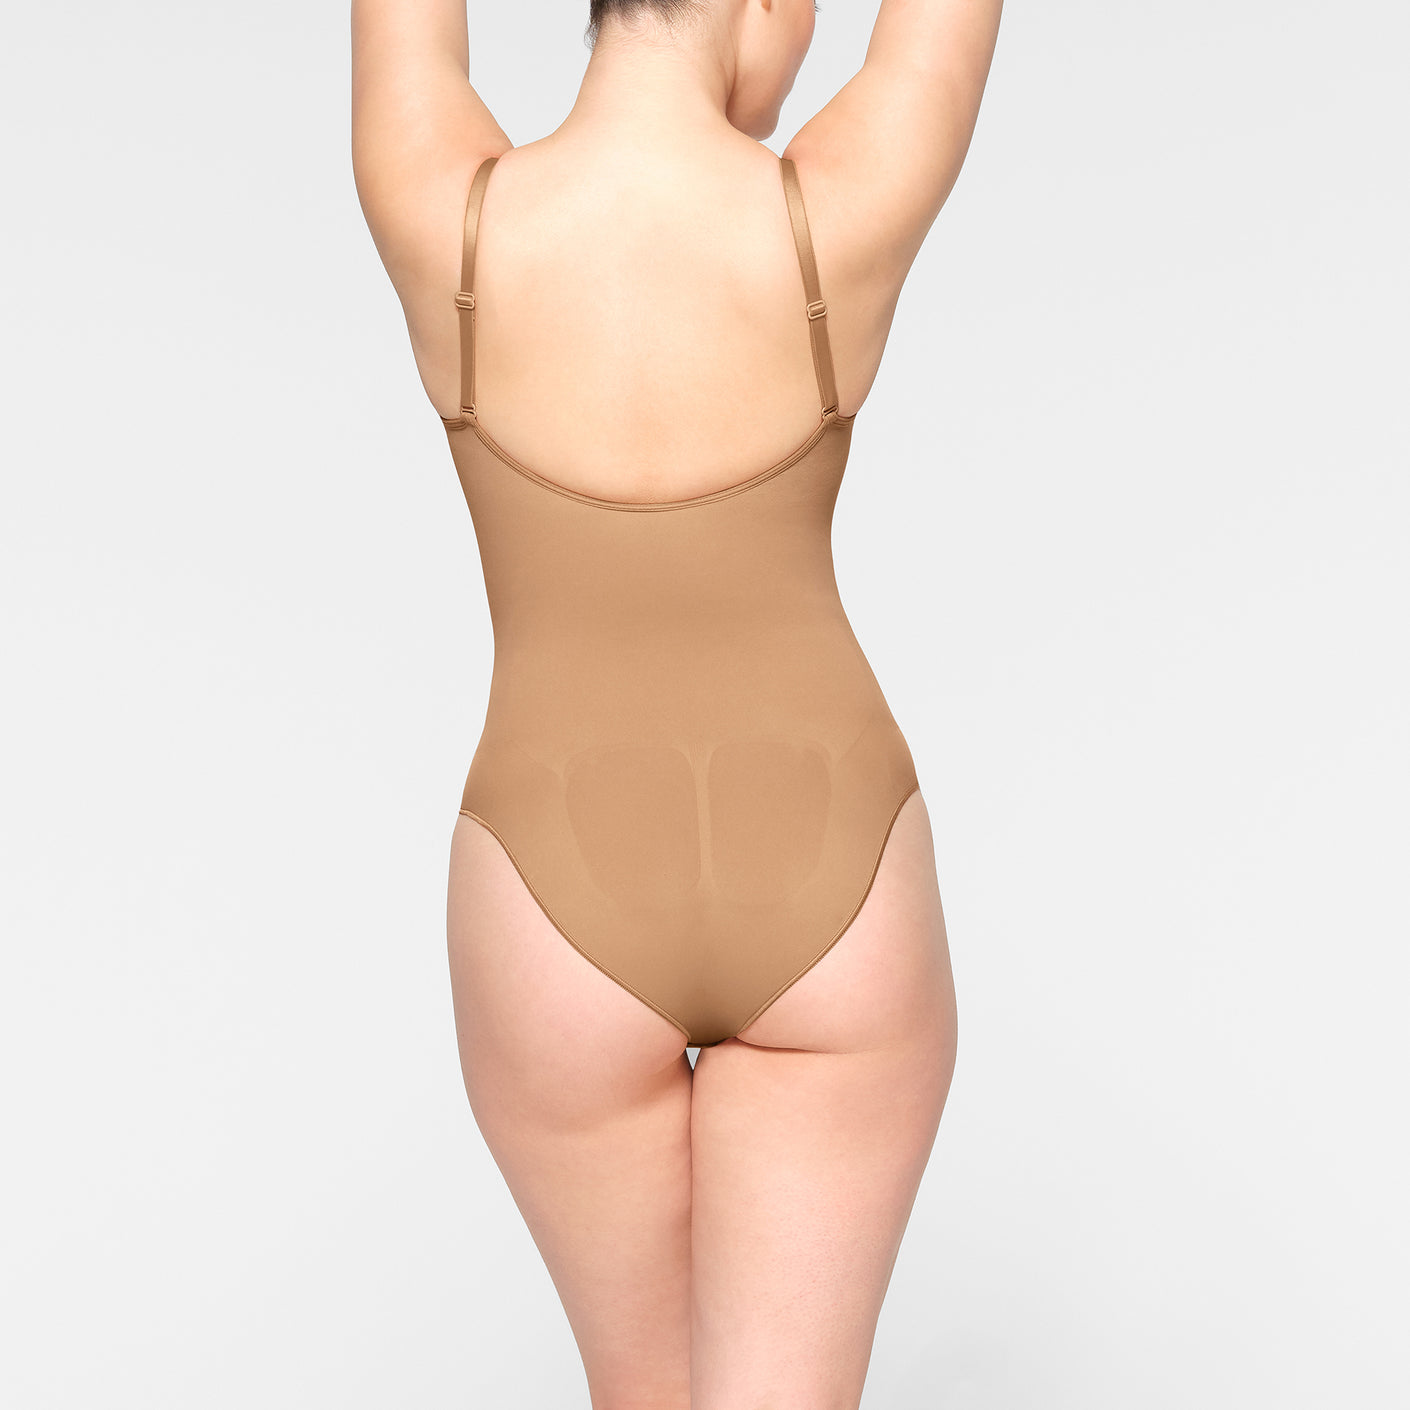 https://cdn.shopify.com/s/files/1/0259/5448/4284/products/SKIMS-SHAPEWEAR-BD-BRF-3370-IE-OCH_0016_BK_cac21b2c-1f6a-46bf-95a3-95392882f91c.jpg?v=1682190843&width=1410&height=1410